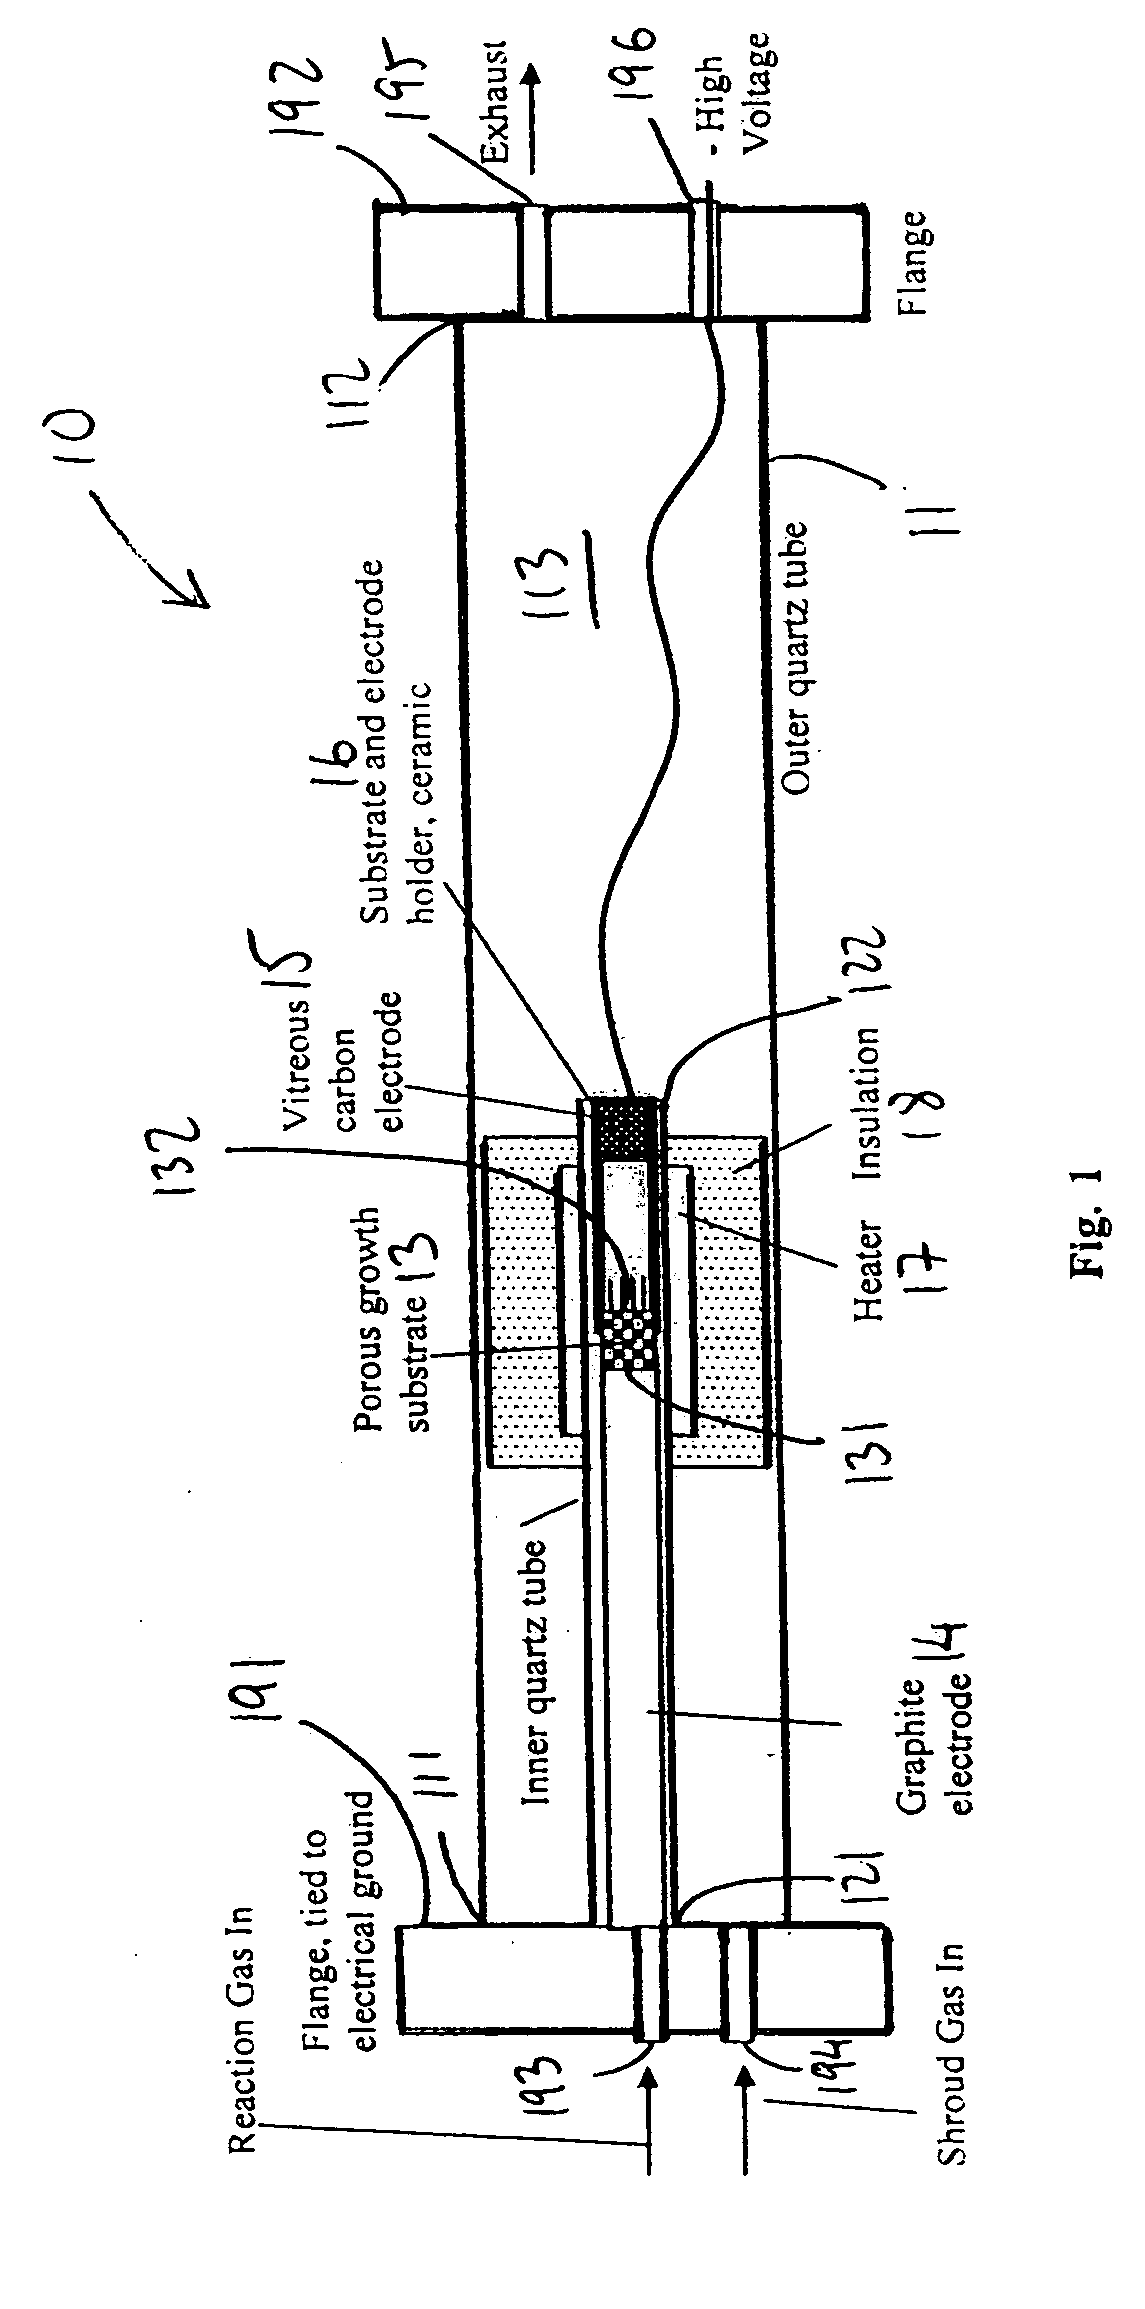 Systems and methods for synthesis of extended length nanostructures